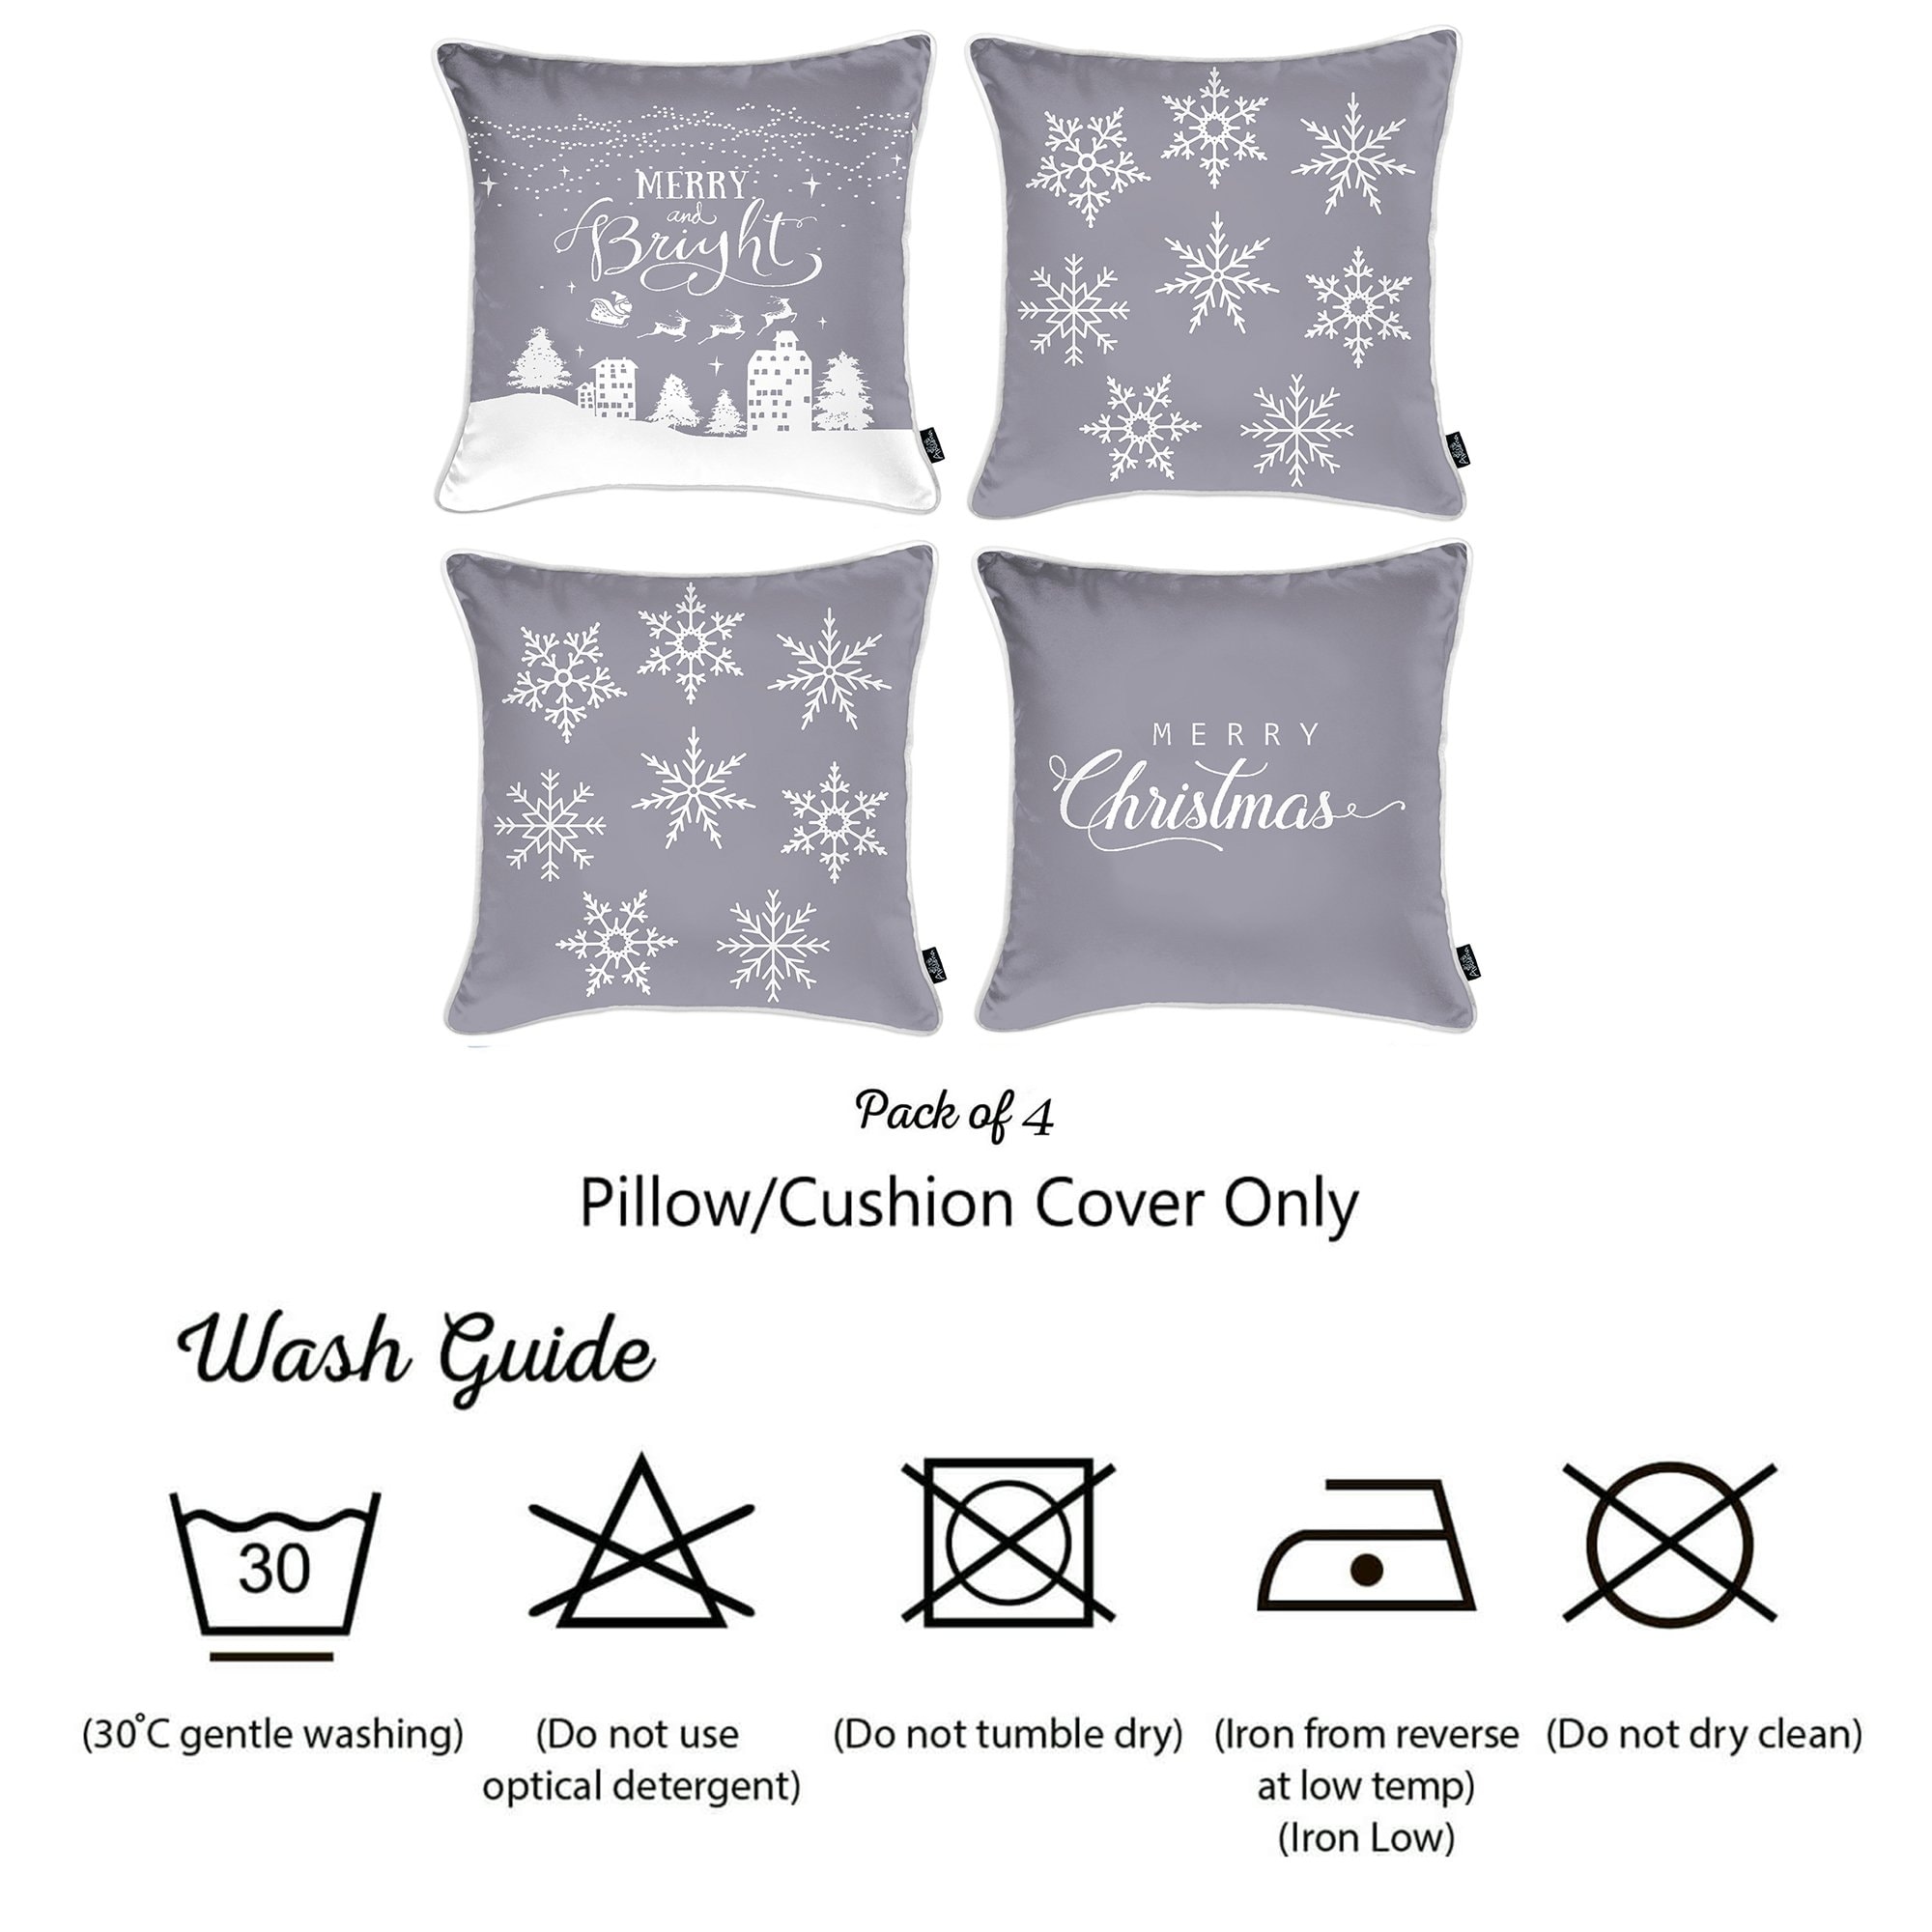 https://ak1.ostkcdn.com/images/products/is/images/direct/406a417ef3ccf91a377ad59137f04201d05fbe14/Merry-Christmas-Set-of-4-Throw-Pillow-Covers-Christmas-Gift-18%22x18%22.jpg